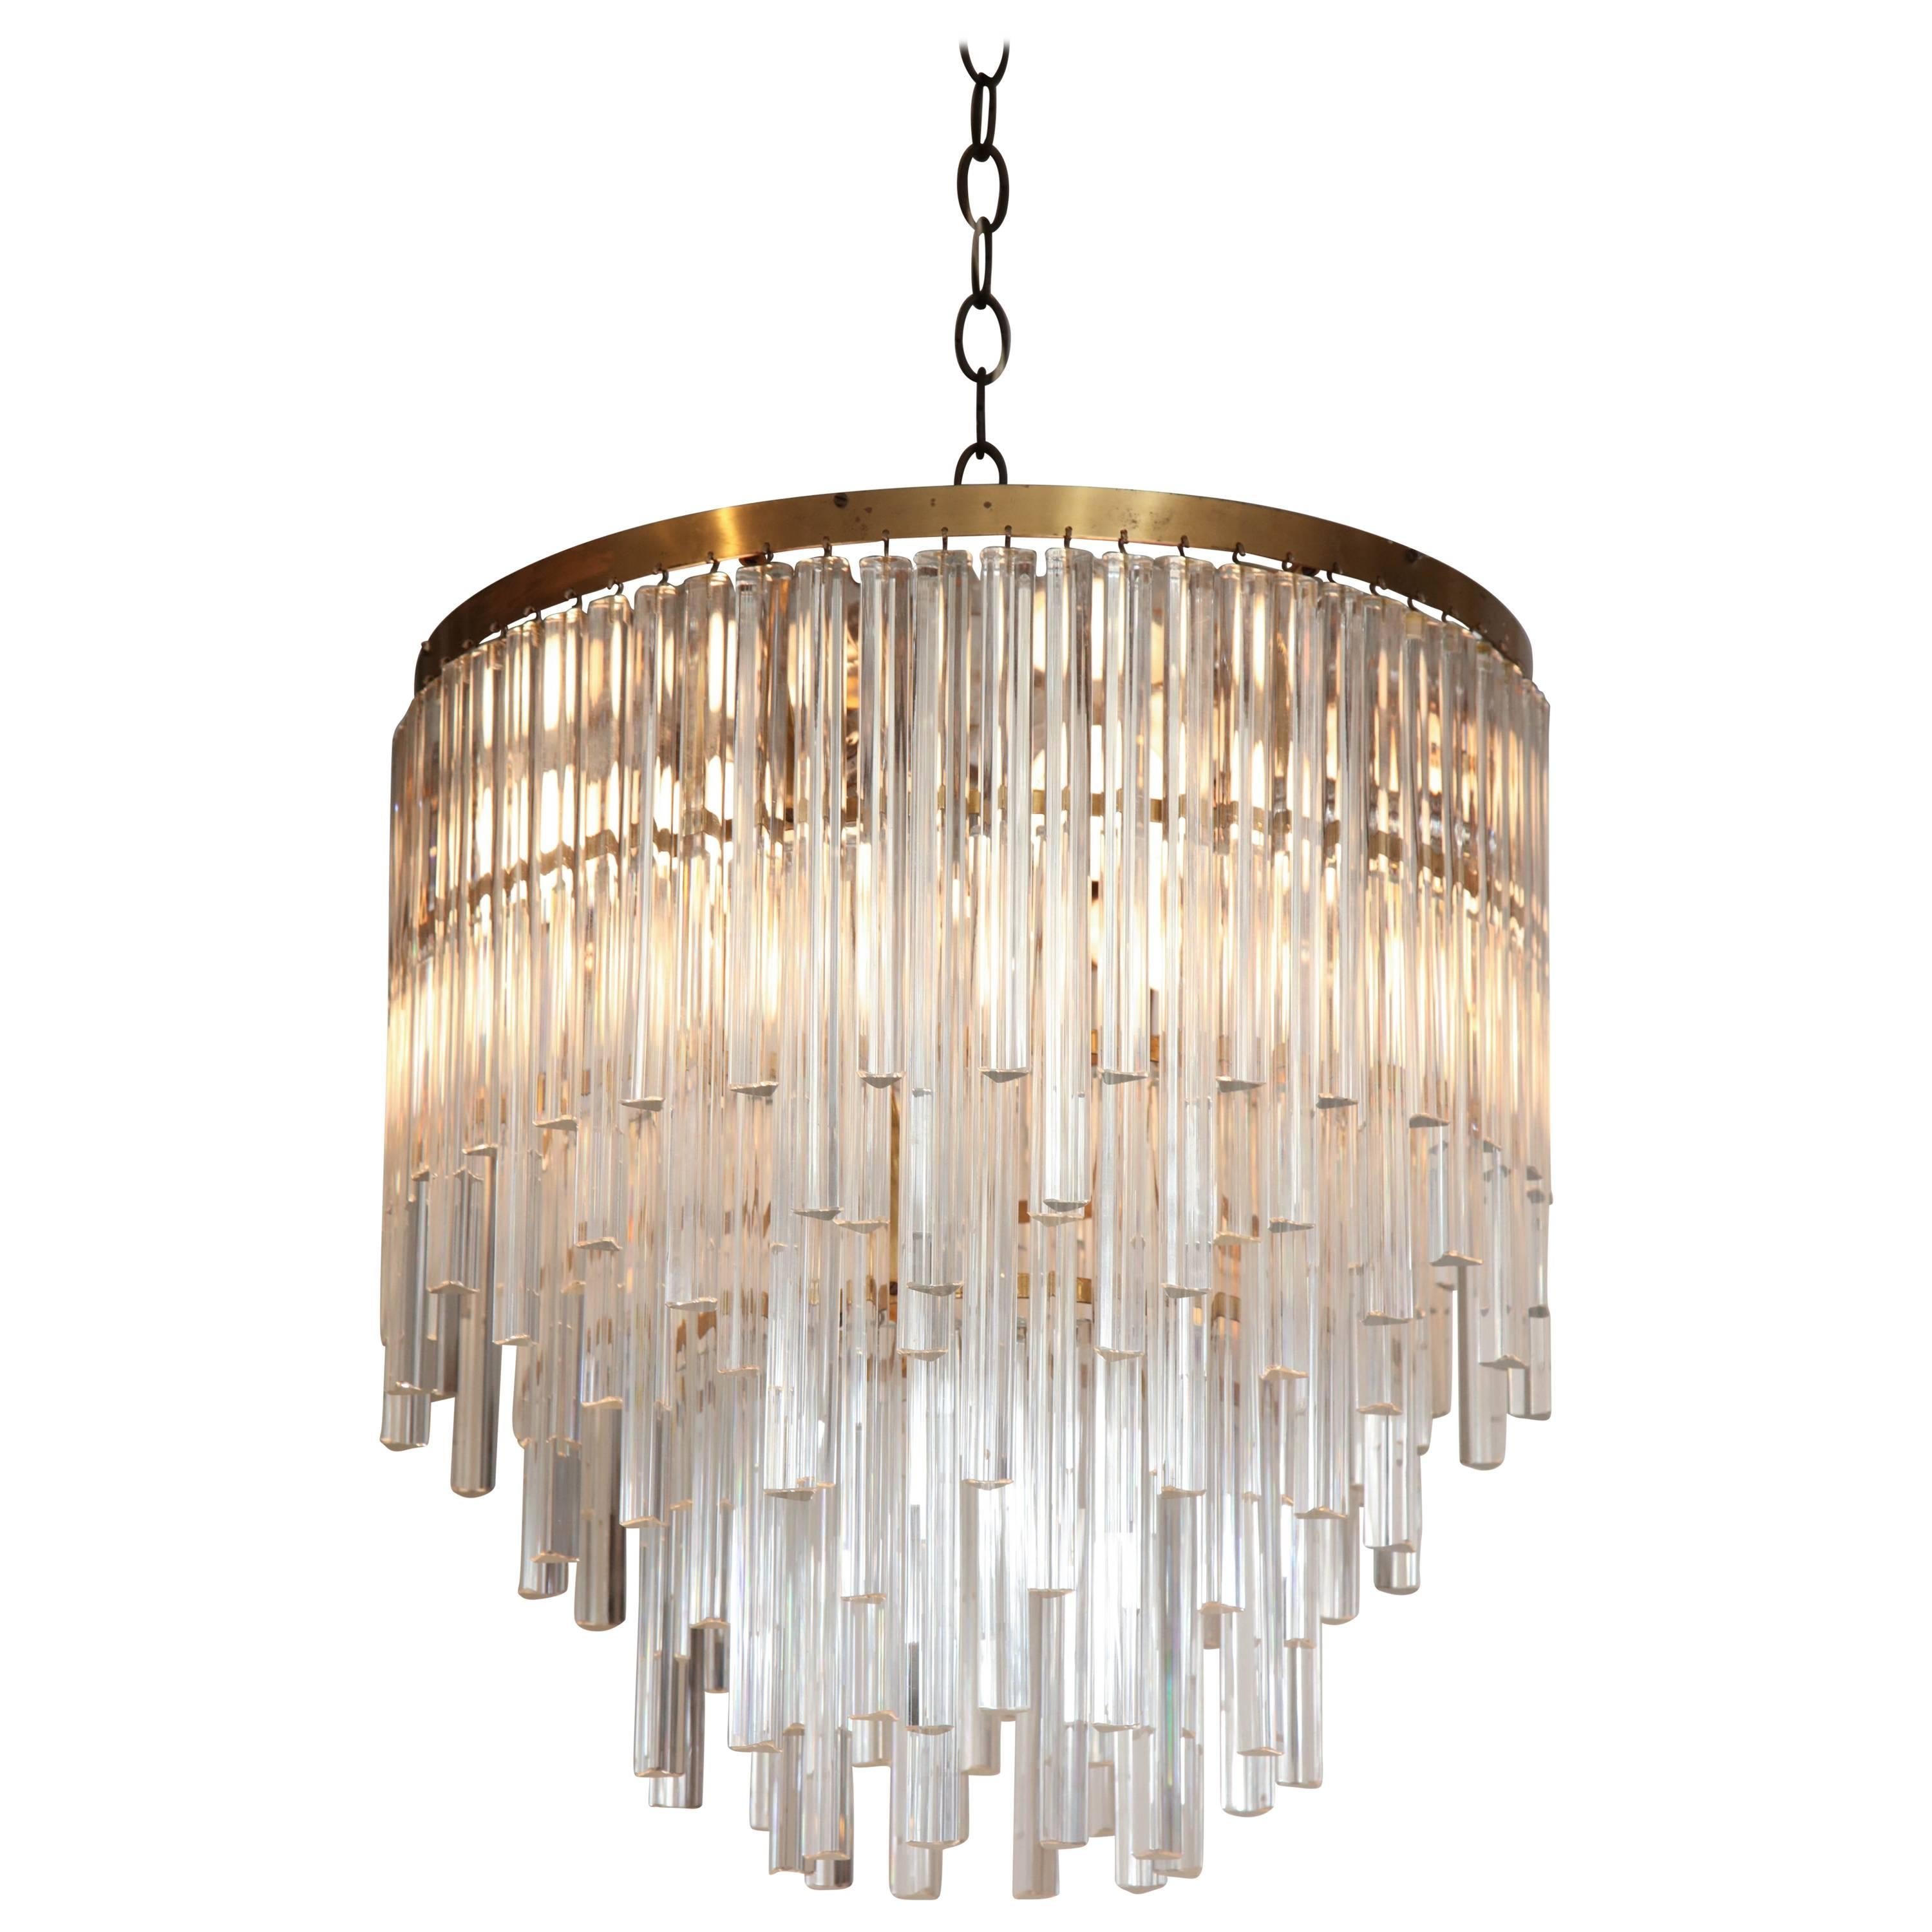 Round, tiered Murano glass chandelier with hanging 